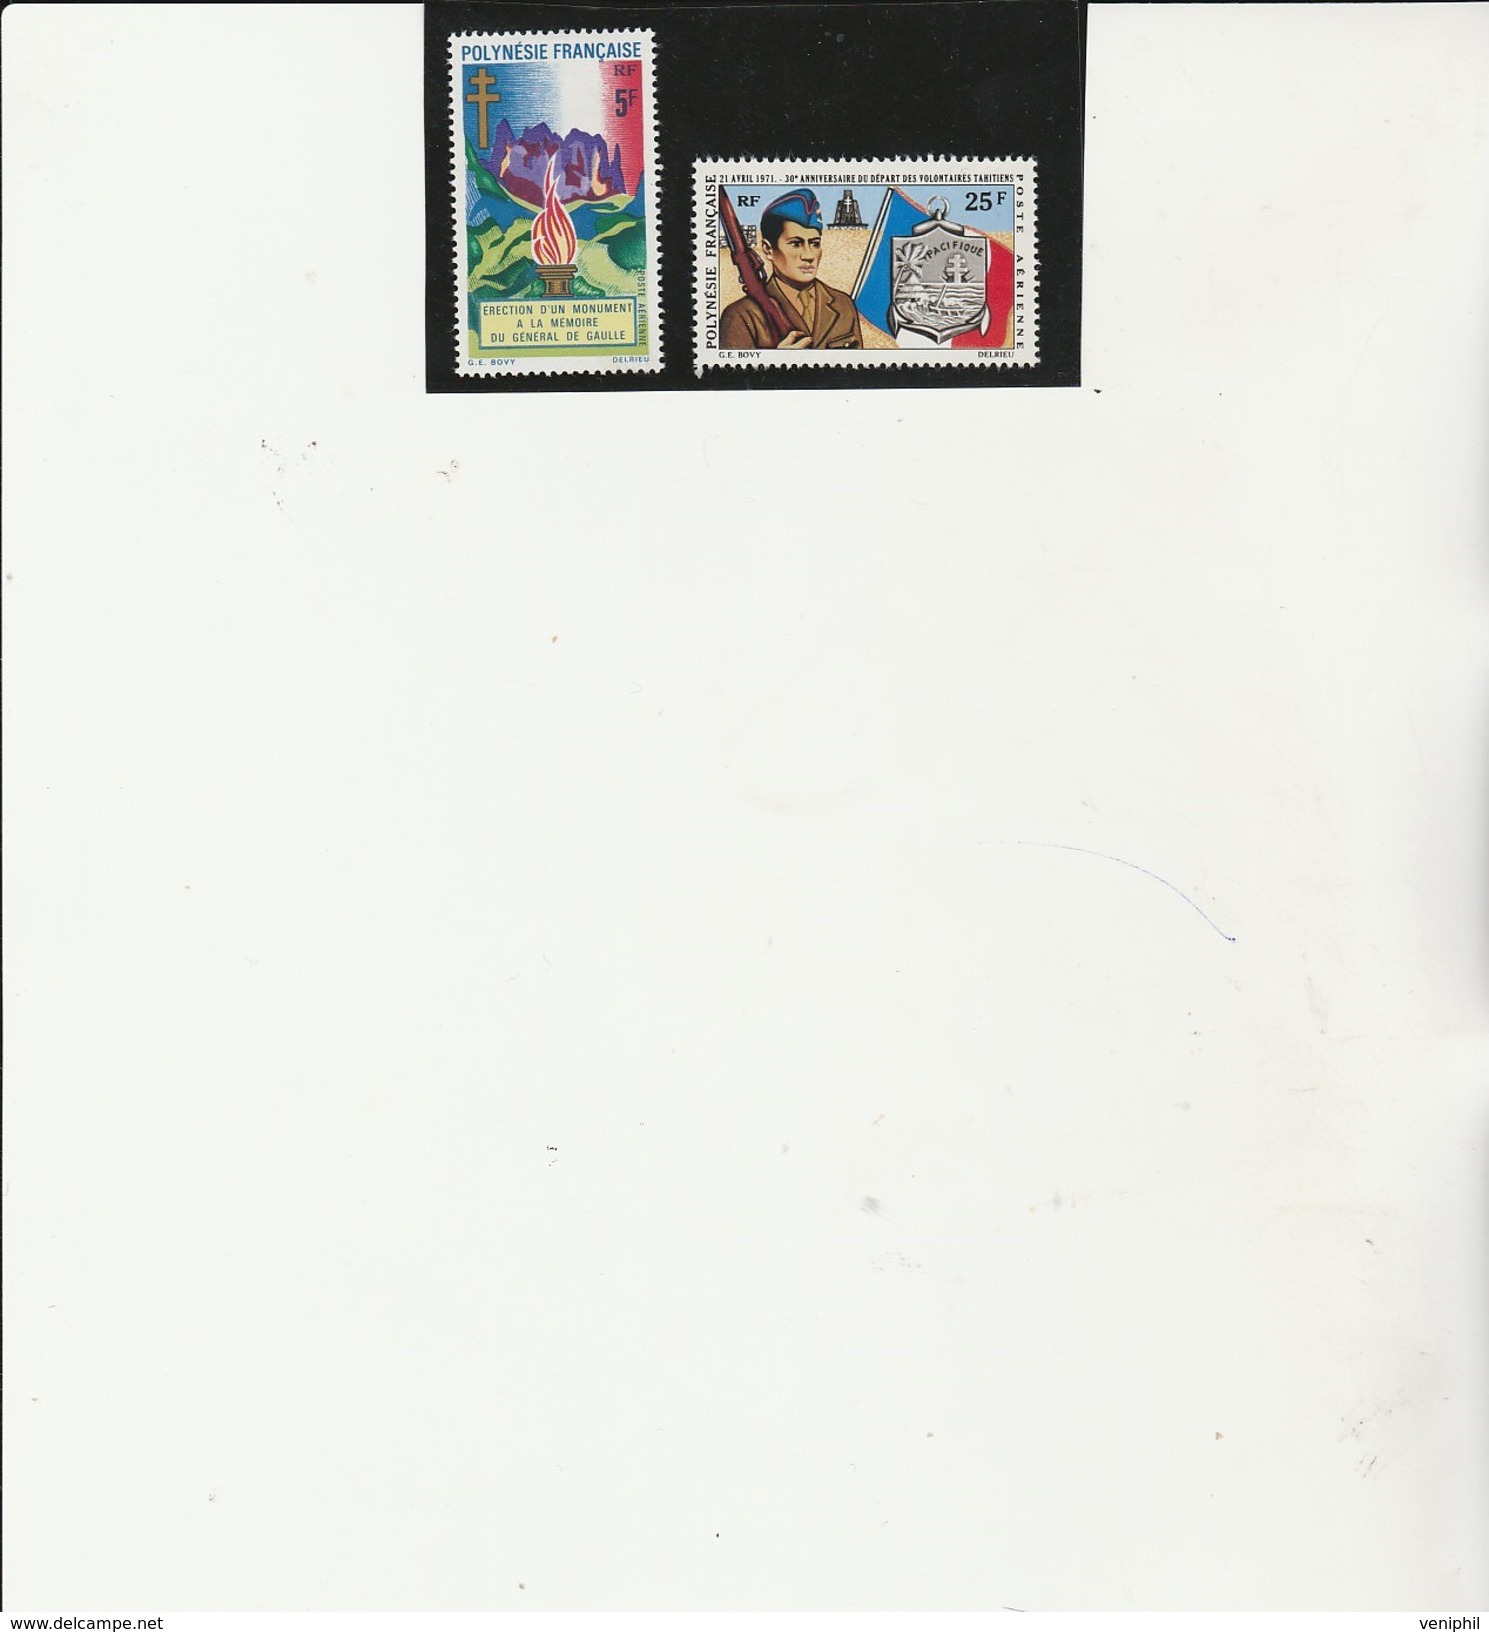 POLYNESIE FRANCAISE - POSTE AERIENNE N° 46 ET 47 TRES INFIME CHARNIERE -ANNEE 1971 -COTE : 23,20 € - Unused Stamps